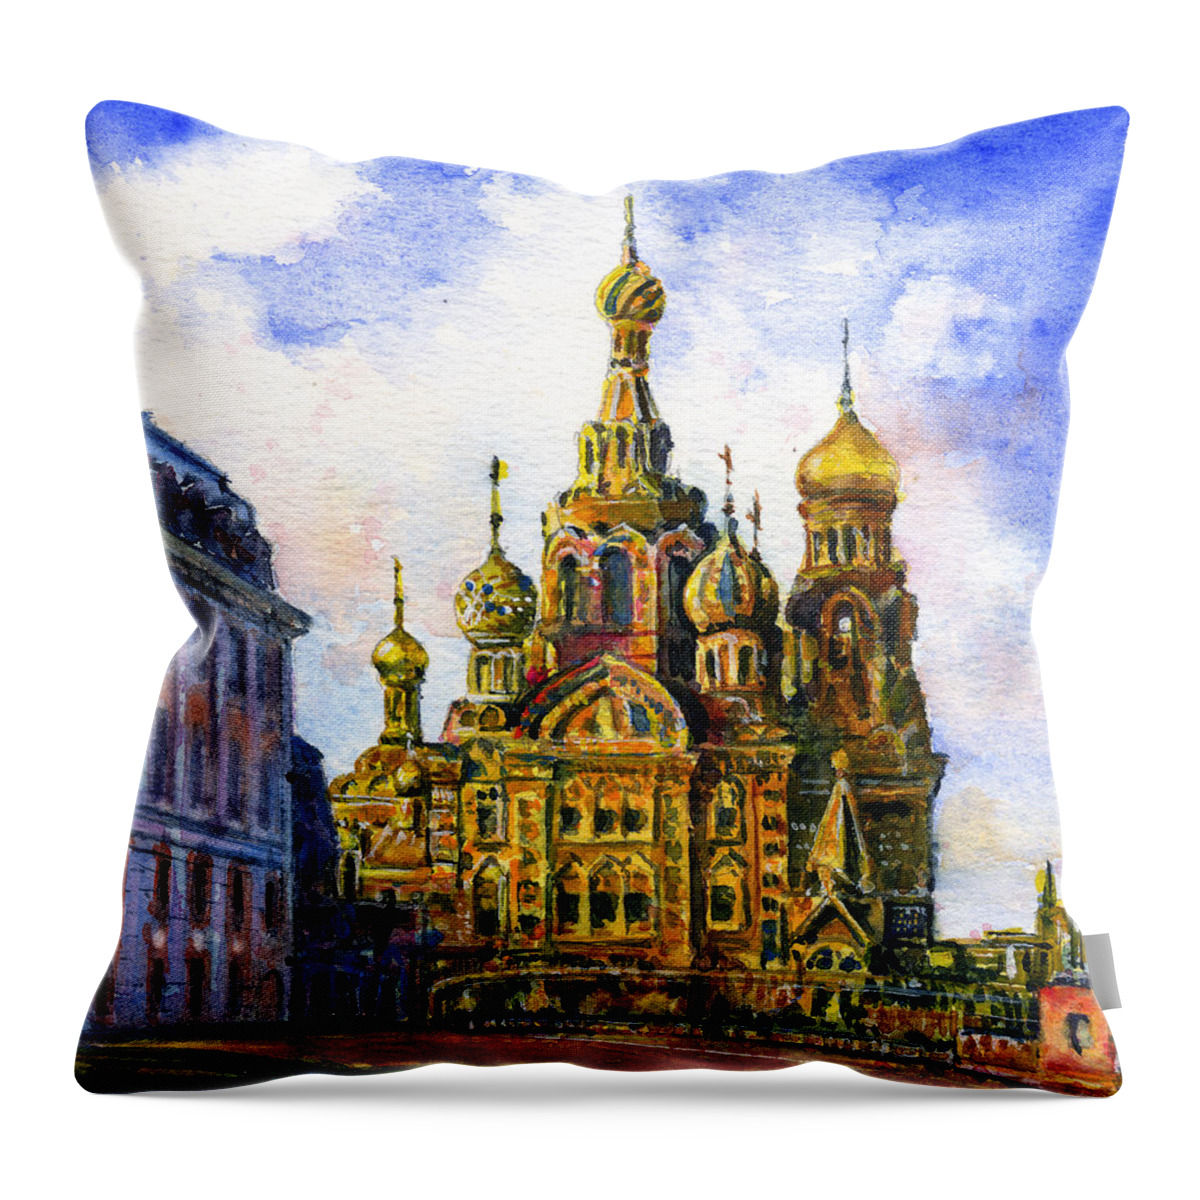 St. Petersburg Throw Pillow featuring the painting Church of the Savior on Blood by John D Benson